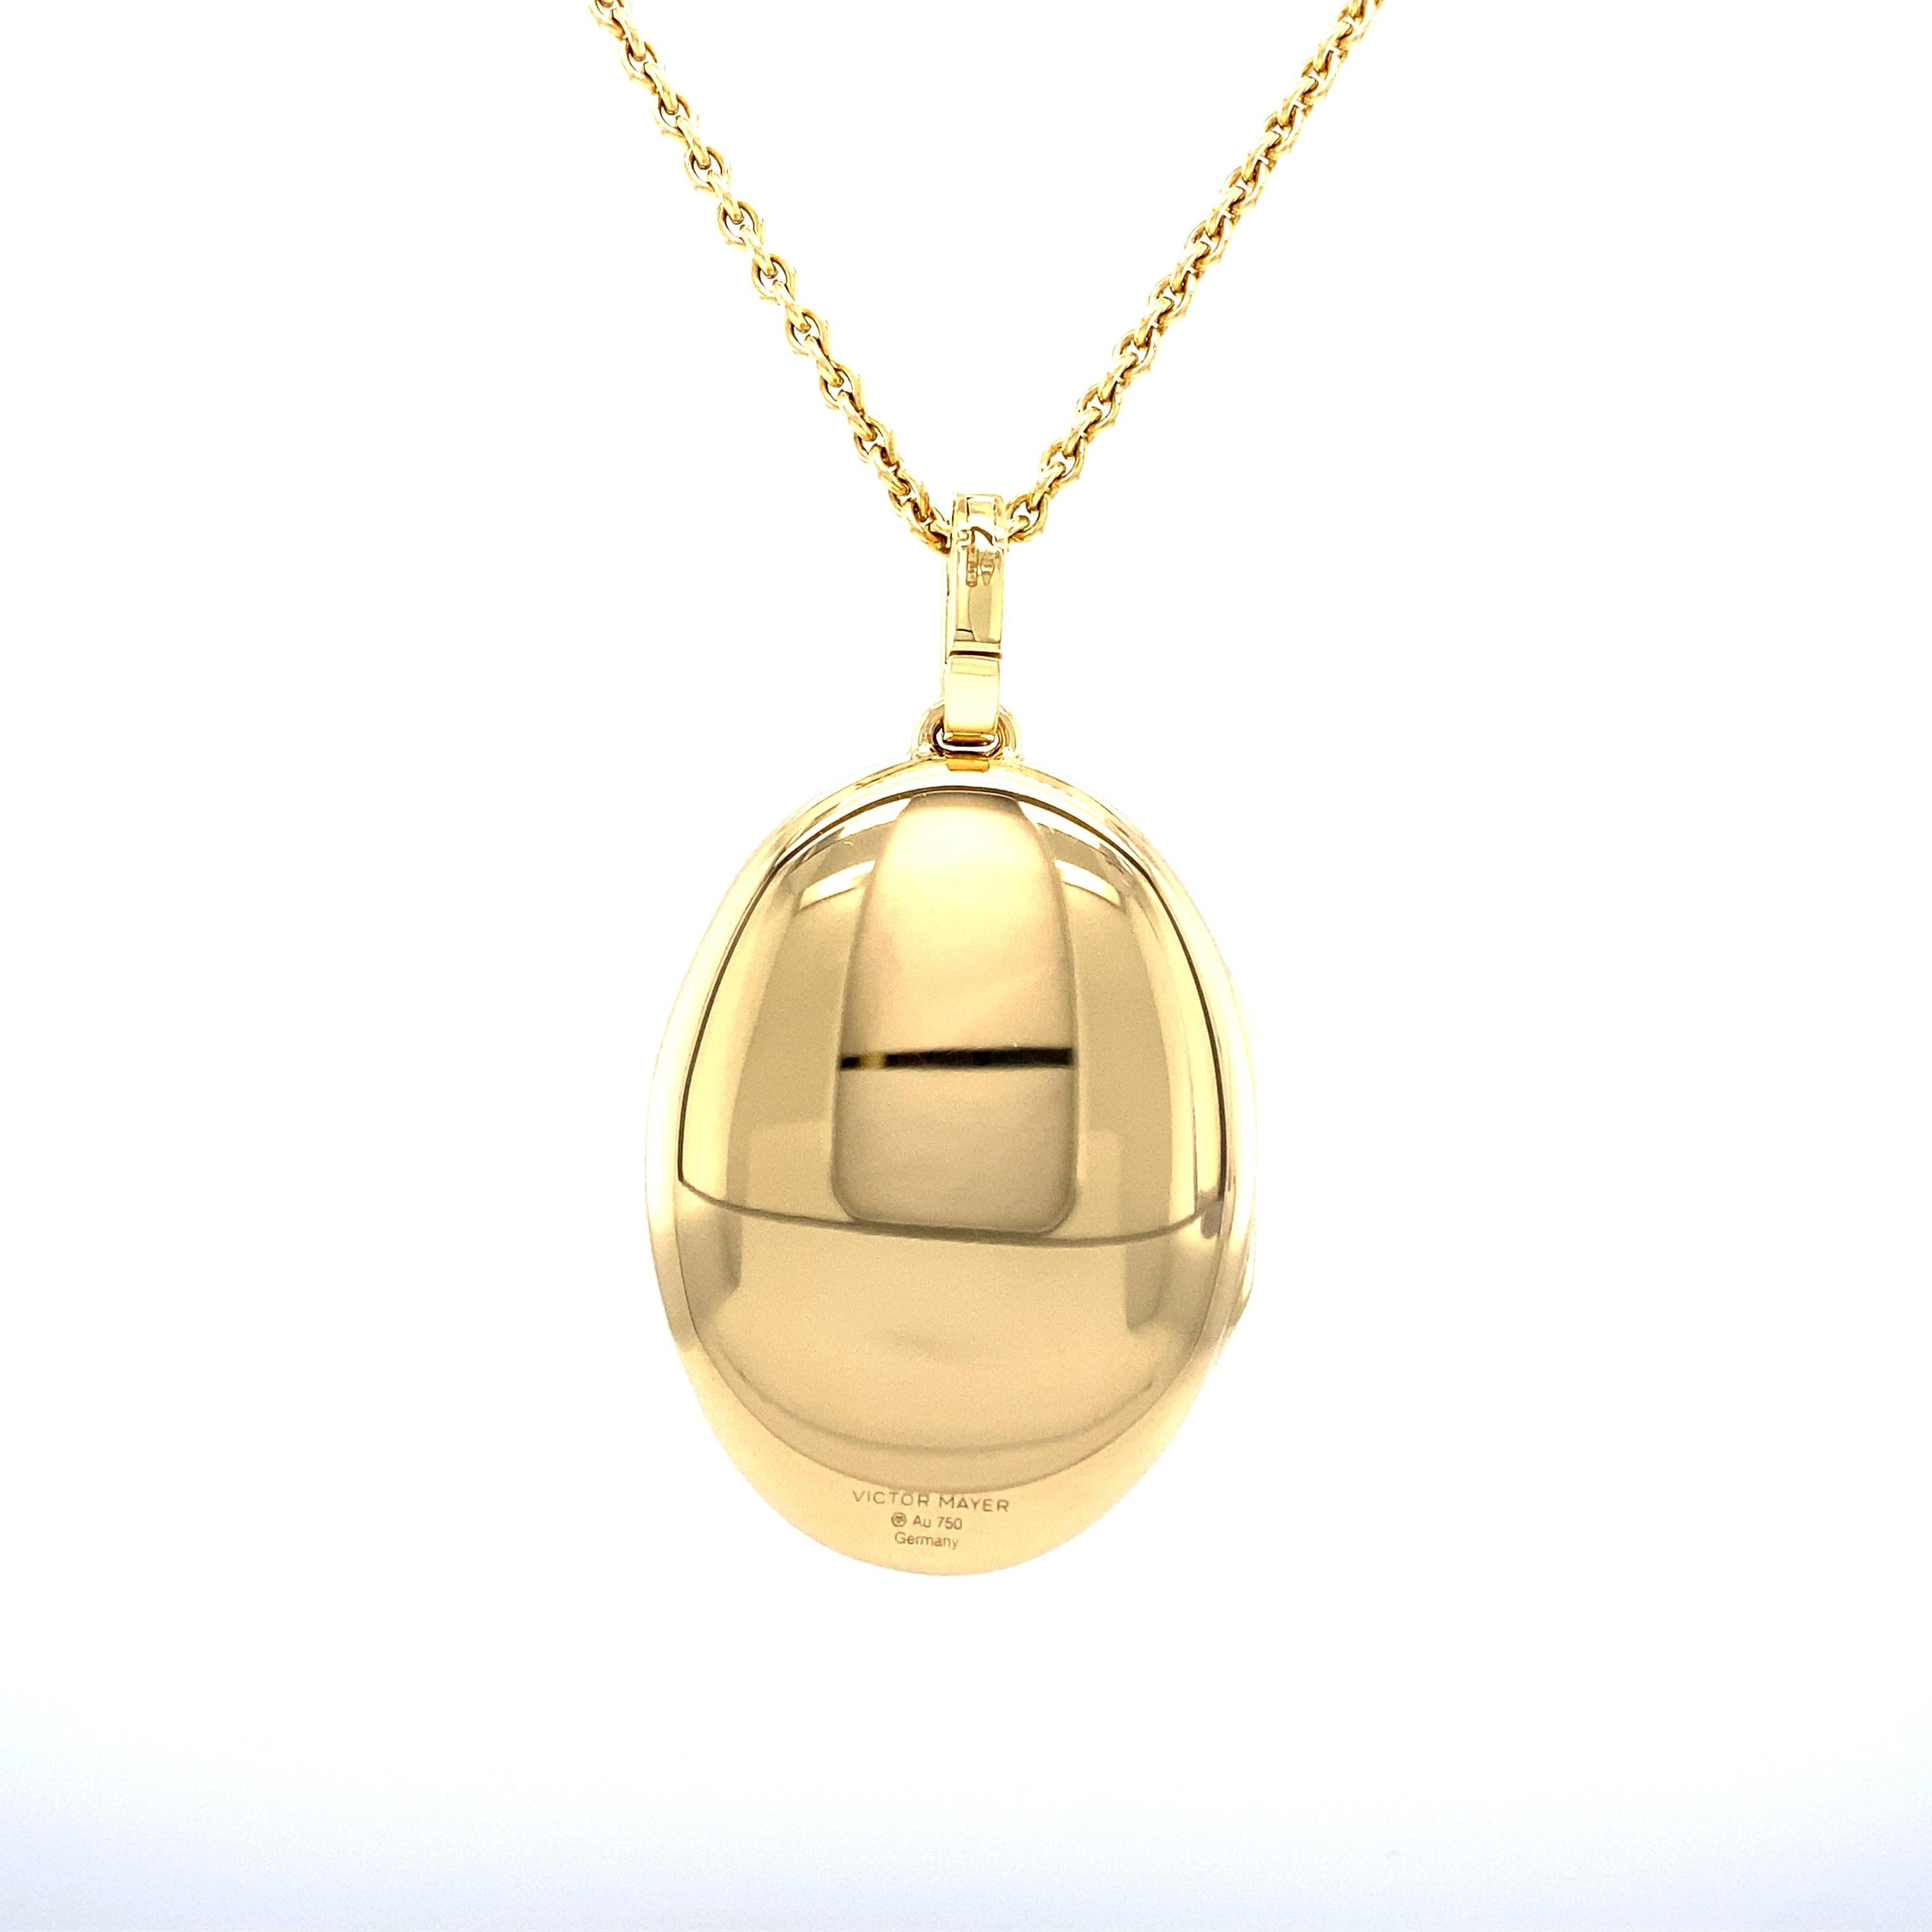 Oval Locket Pendant with Scroll Engraving - 18k Yellow Gold - 32.0 x 23.0 mm For Sale 1